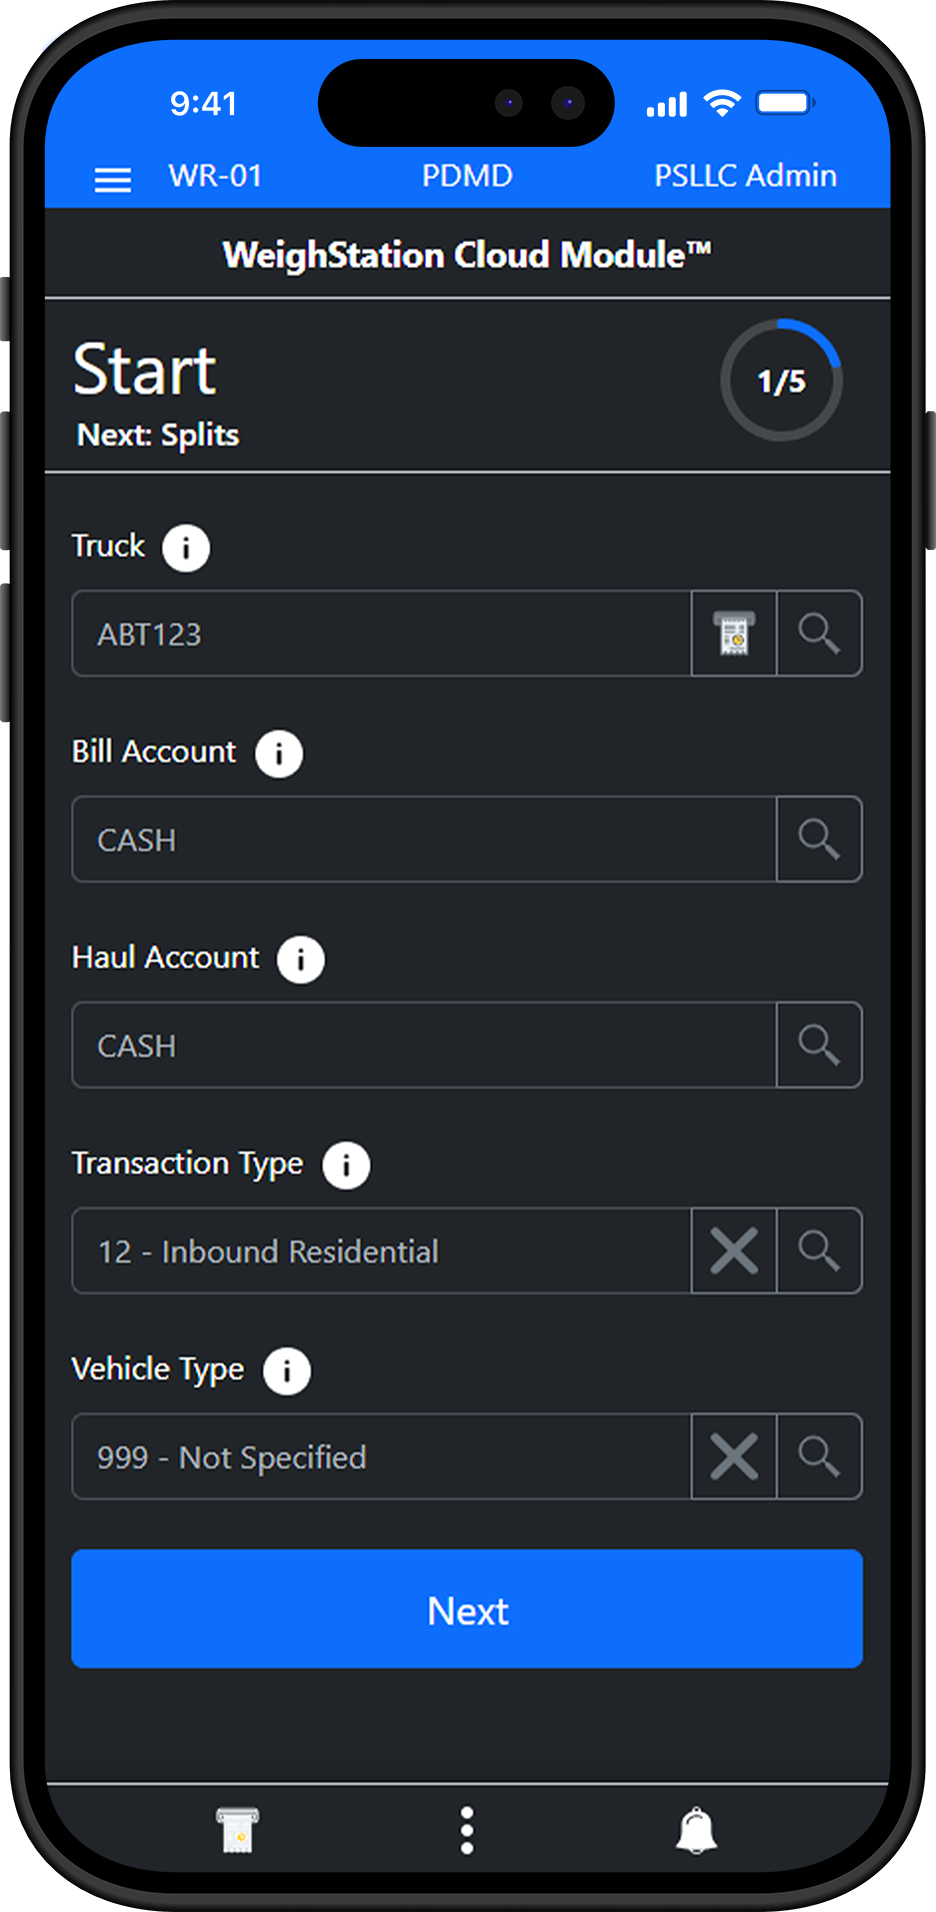 A mobile device with WeighStation Cloud Module™ running on screen